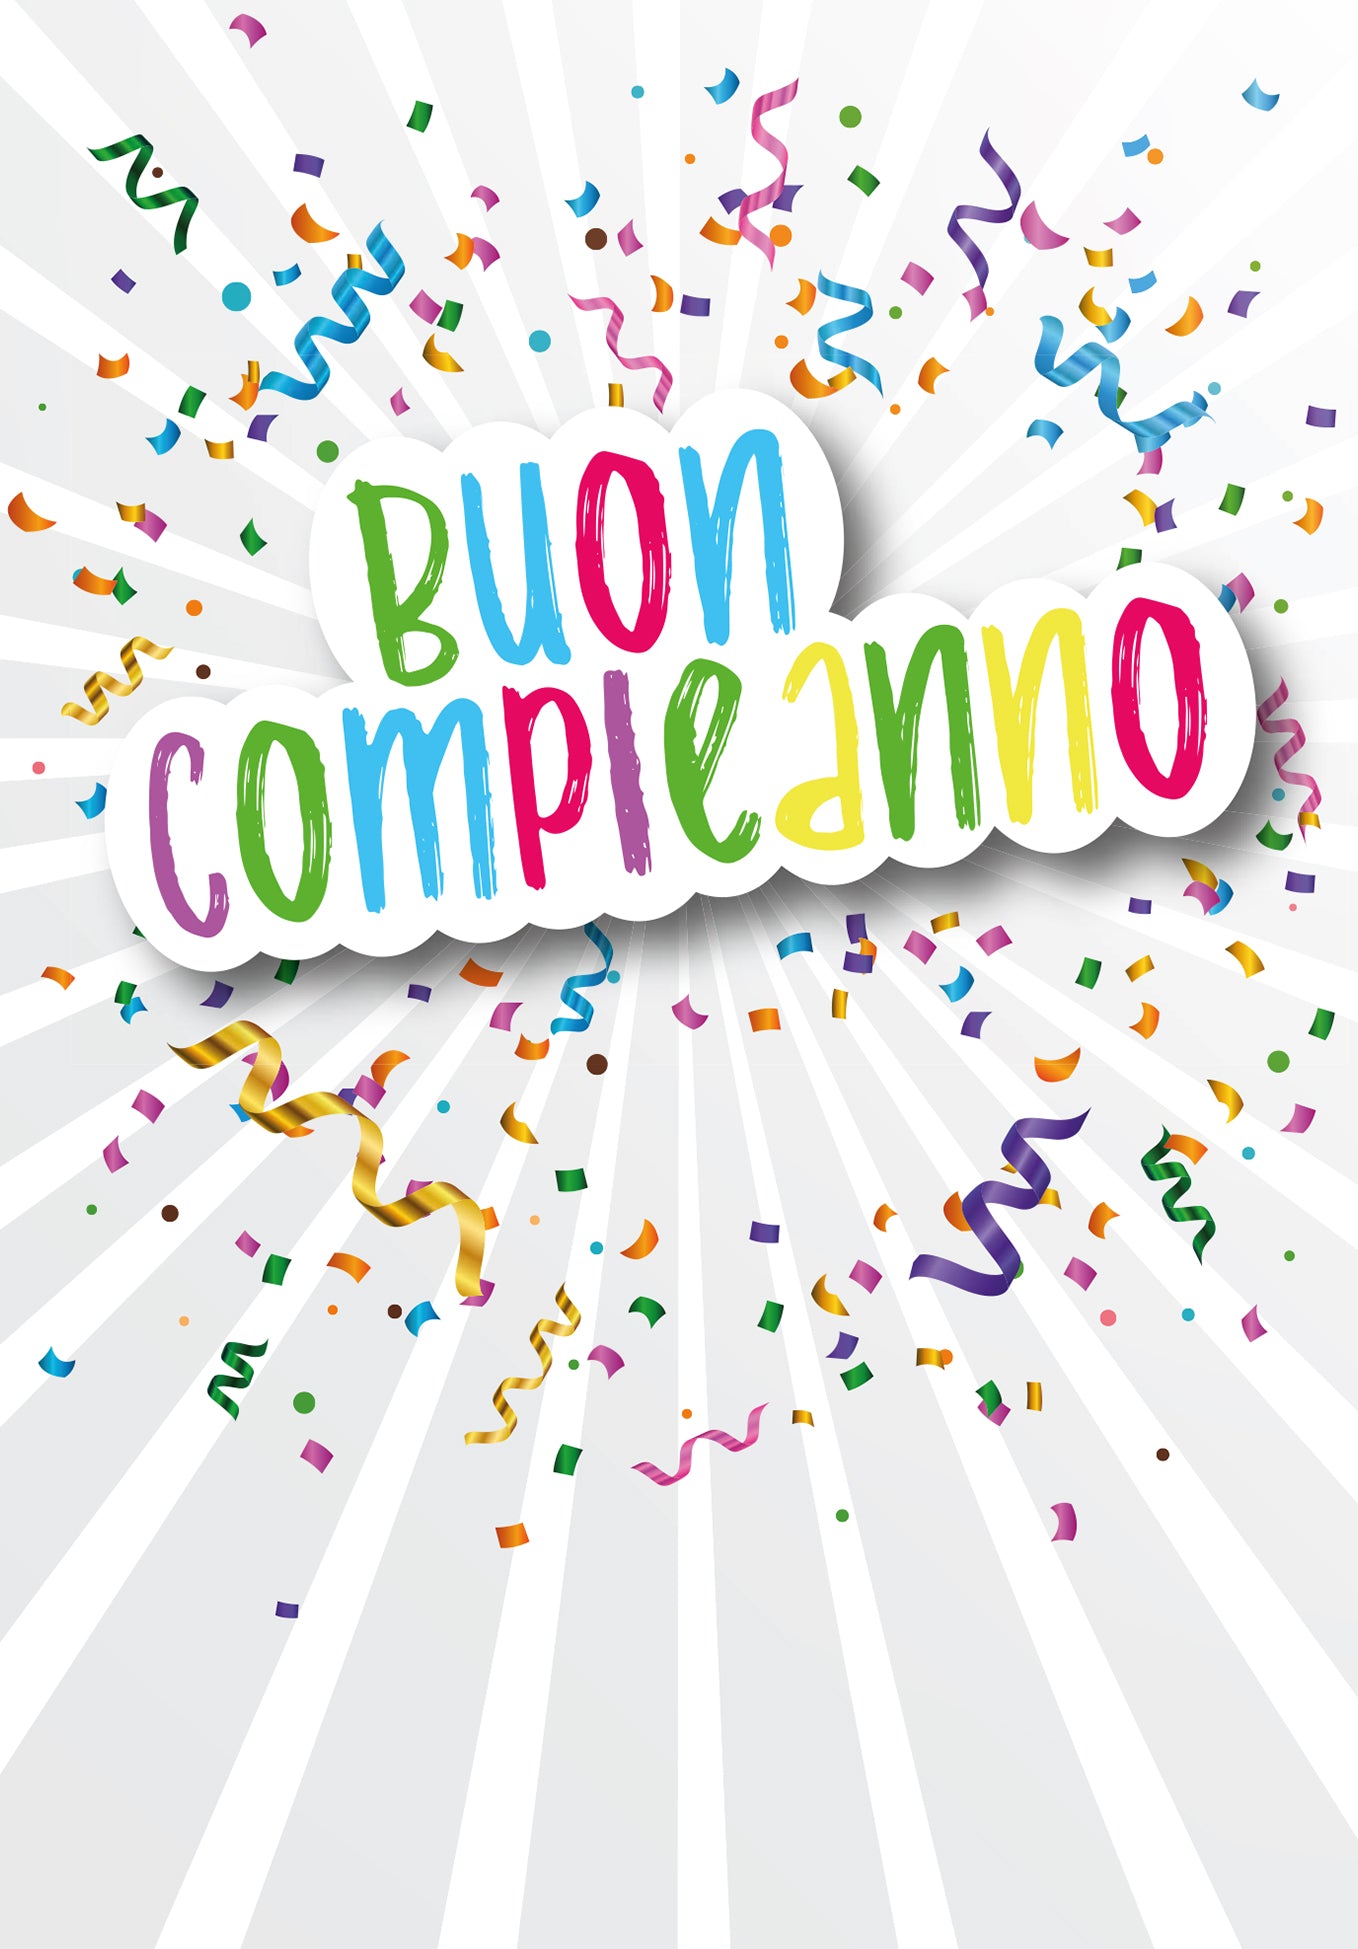 Buon Compleanno - Coriandoli (Optional: With logo for an additional € 2)